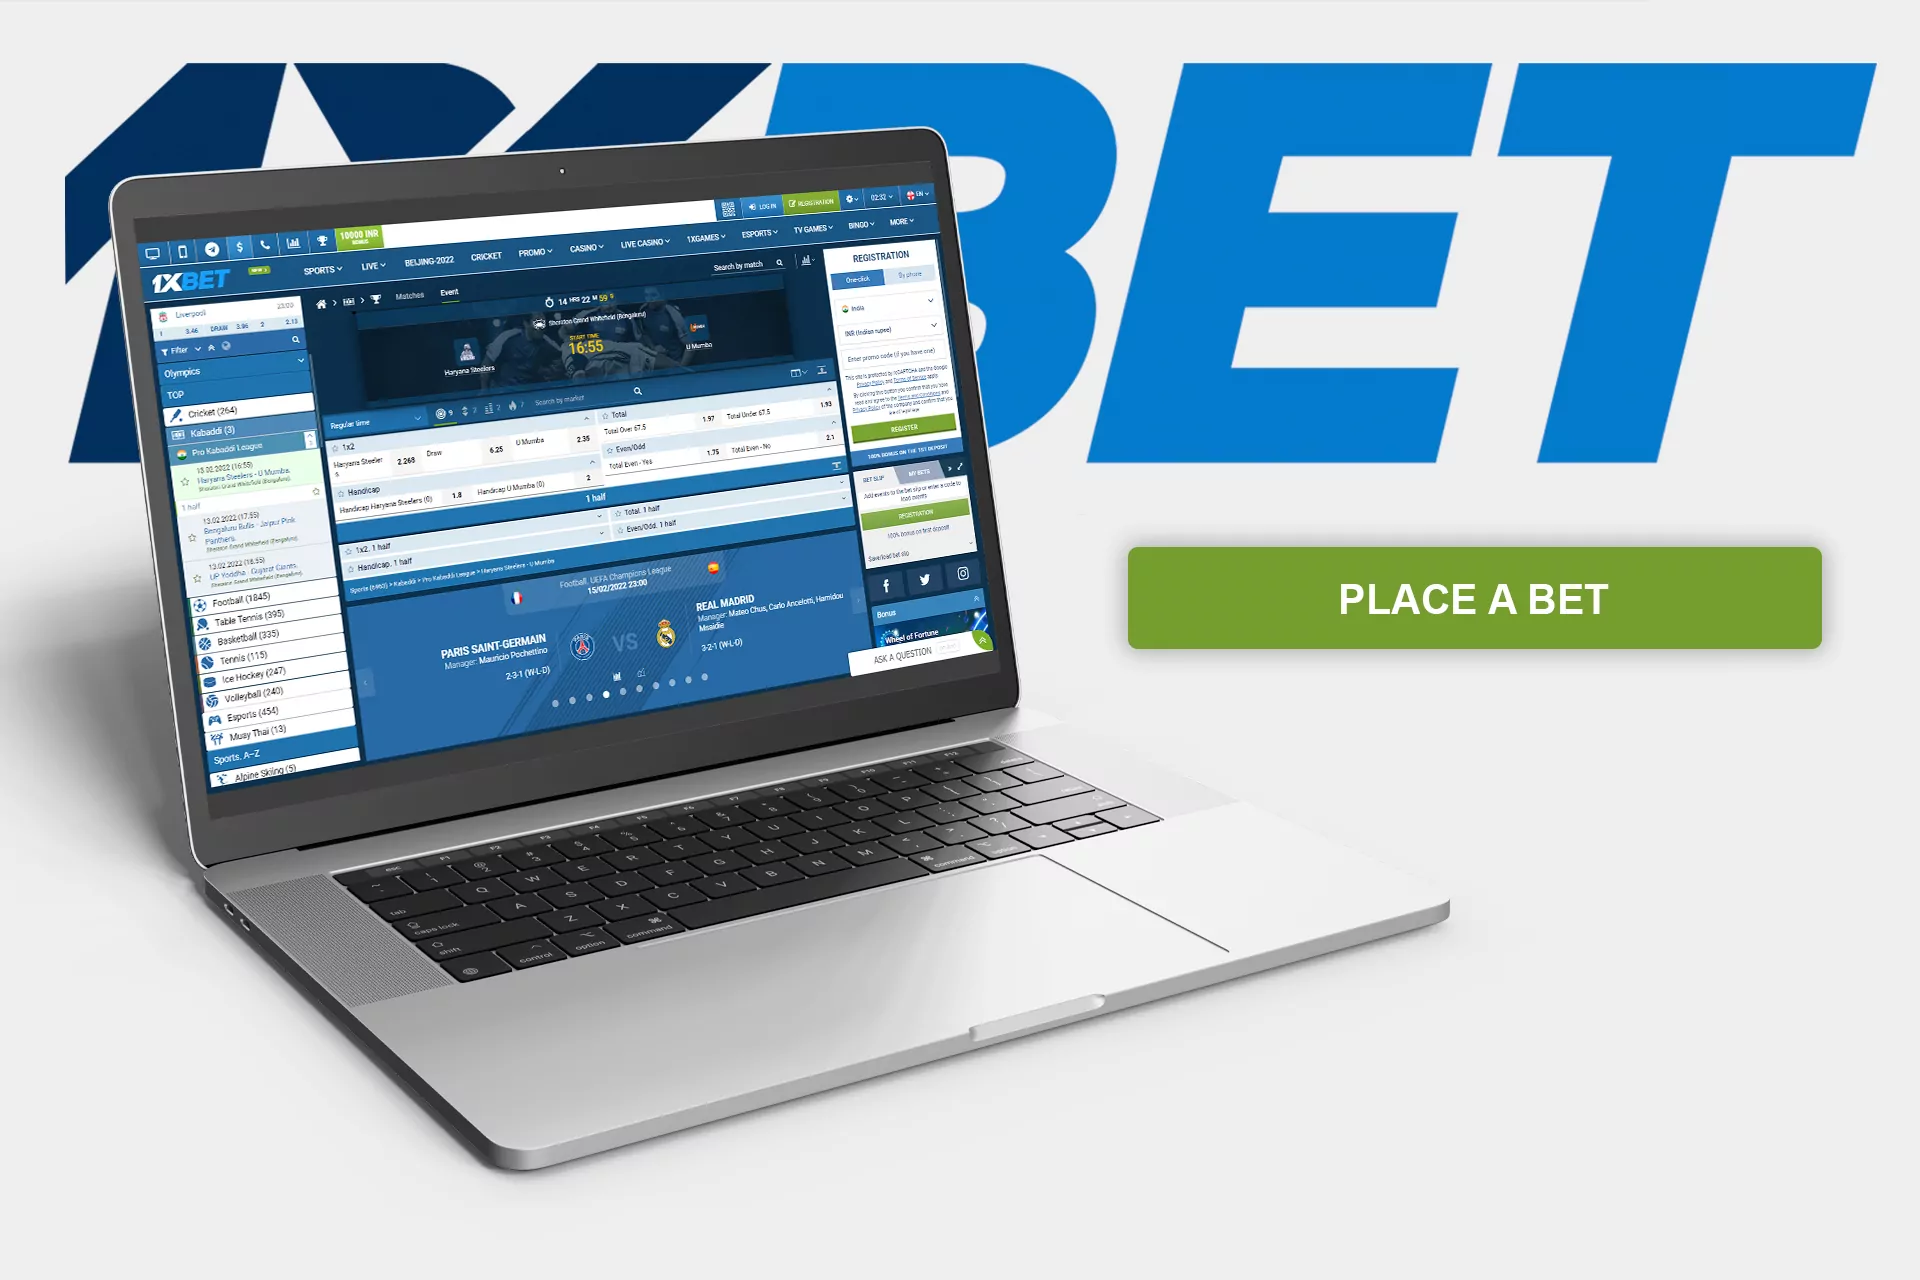 At 1xBet, you can place bets on all the most popular kabaddi events.